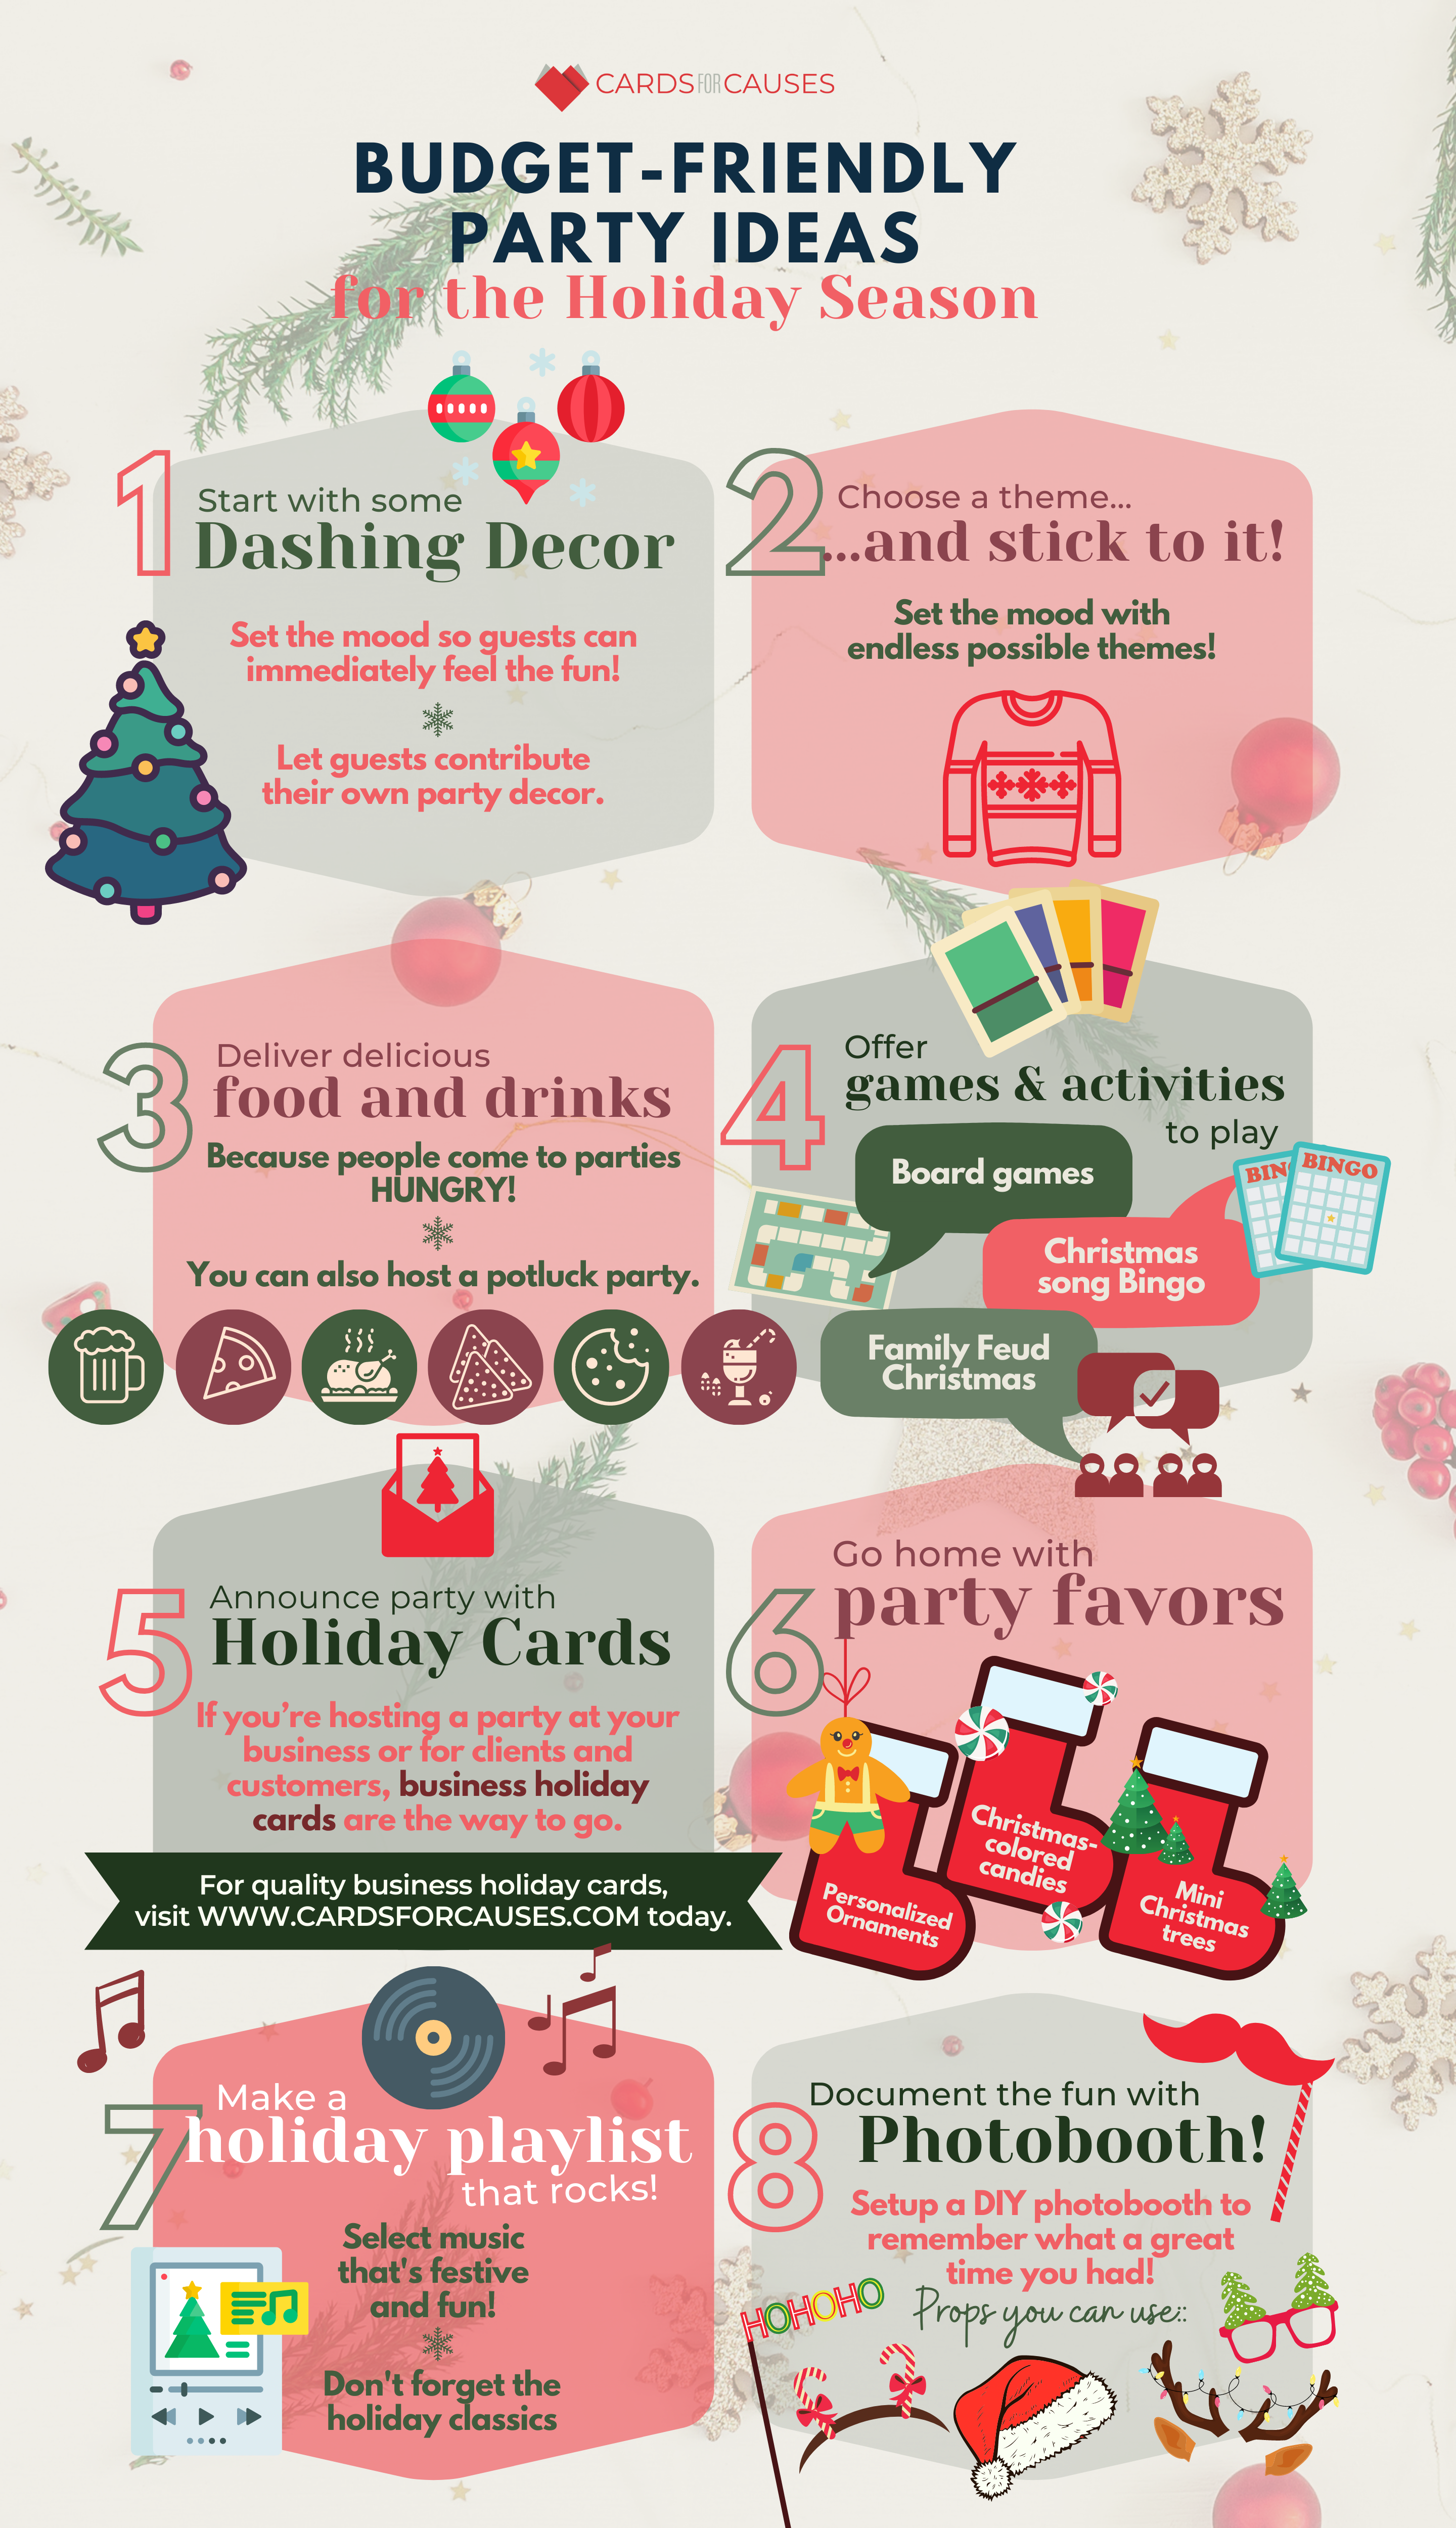 7 Tips For Planning A Holiday Party and Ideas To Wow Your Guests